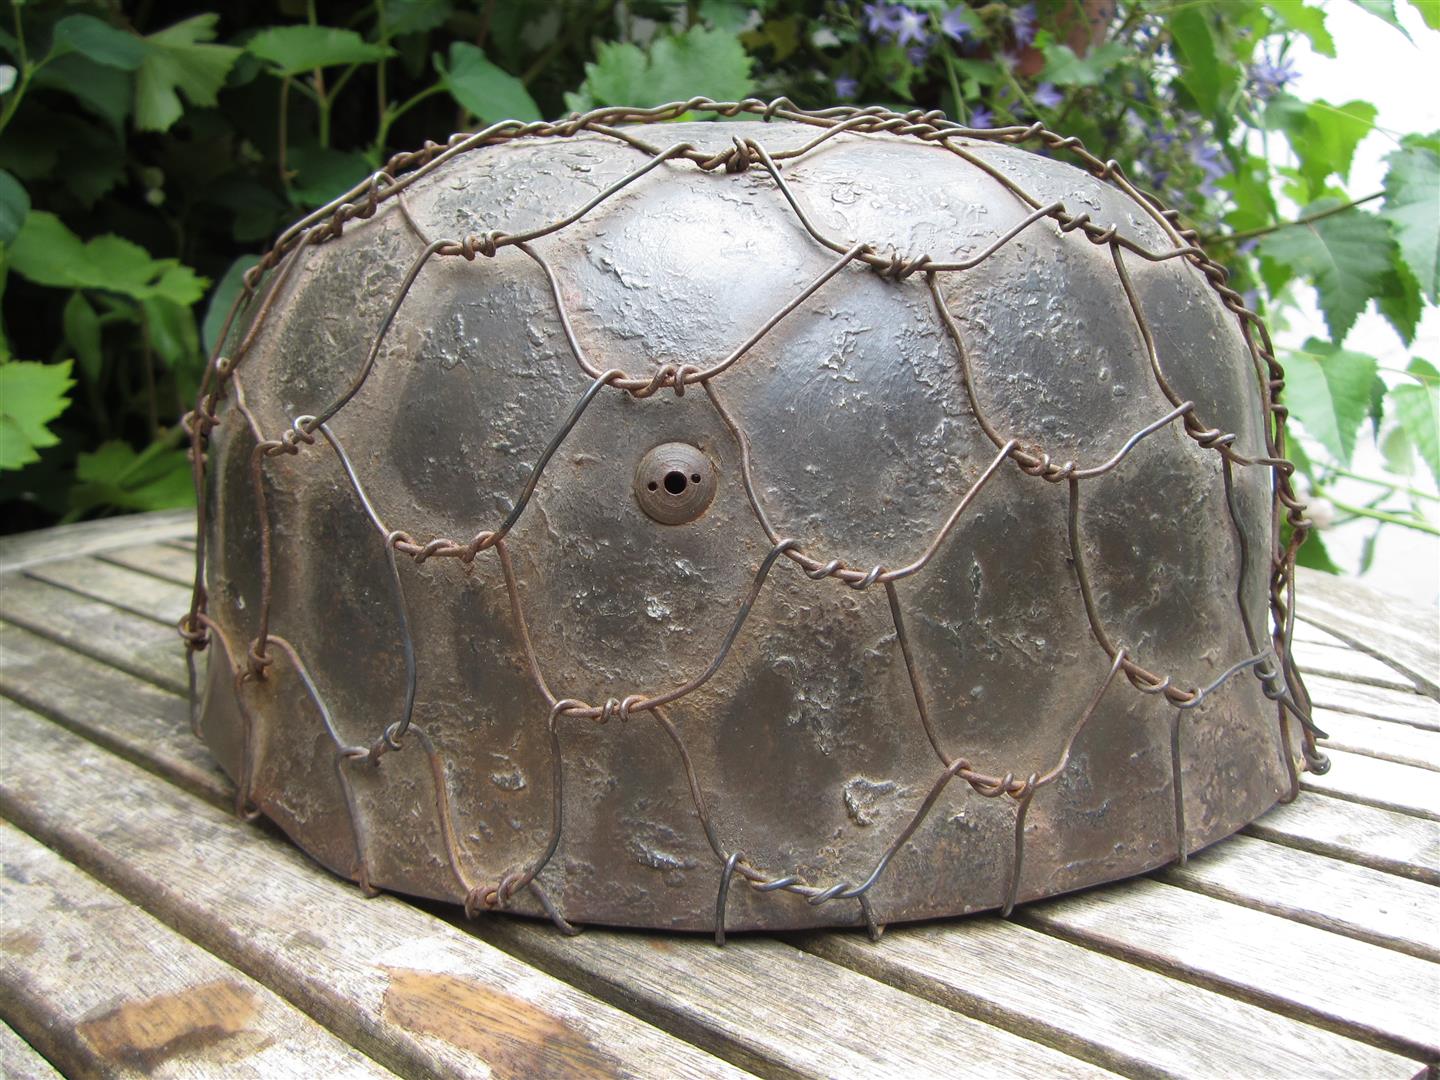 WW2 Falschirmjager Helmet, Camoflaged - Reproduction